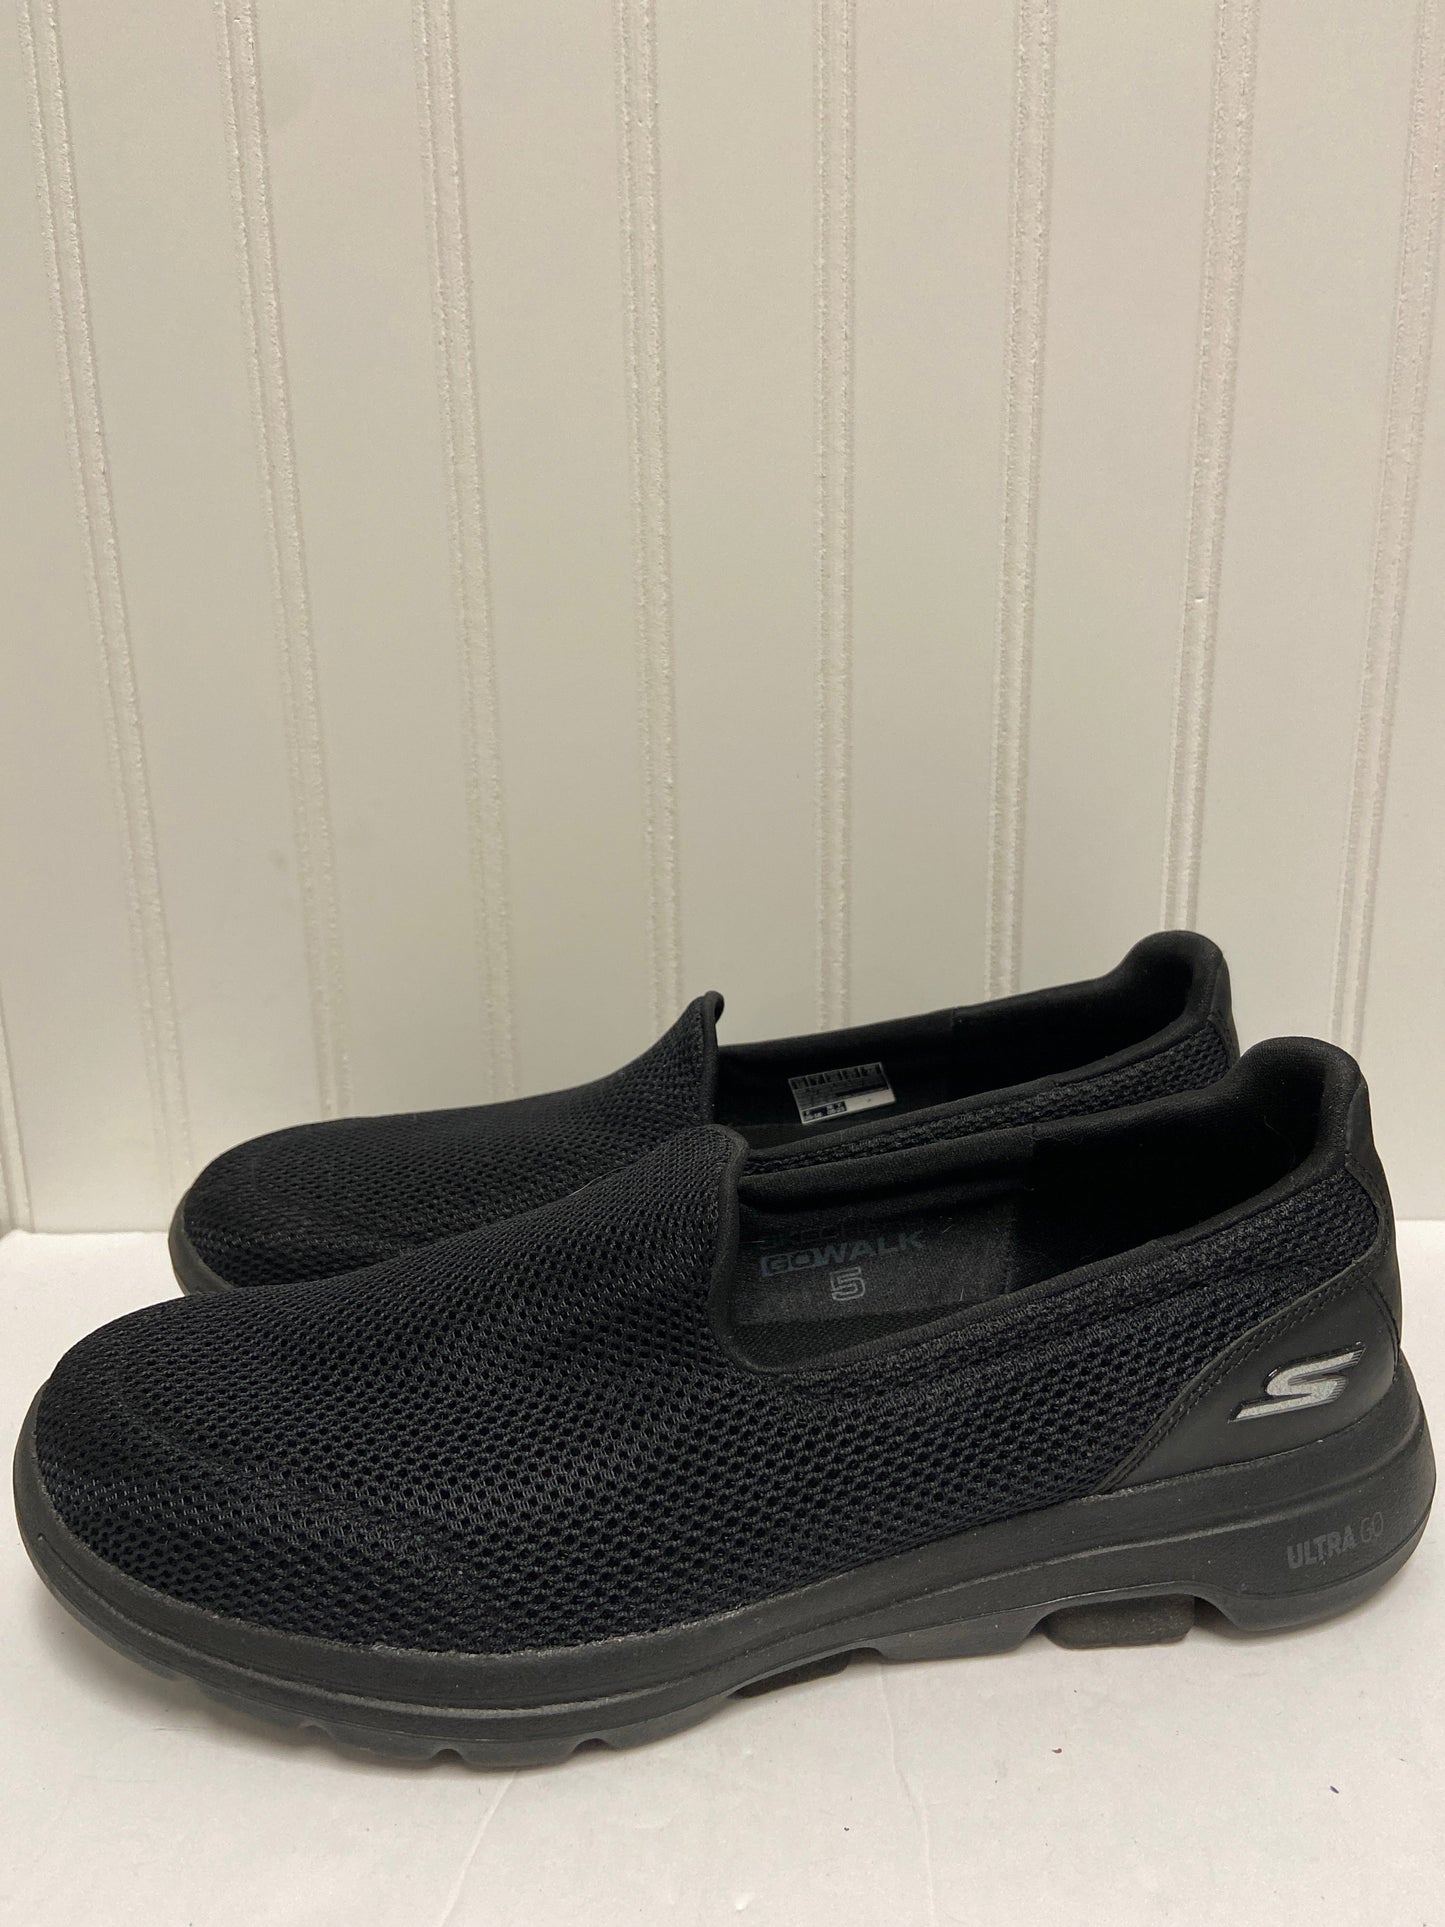 Shoes Athletic By Skechers  Size: 10